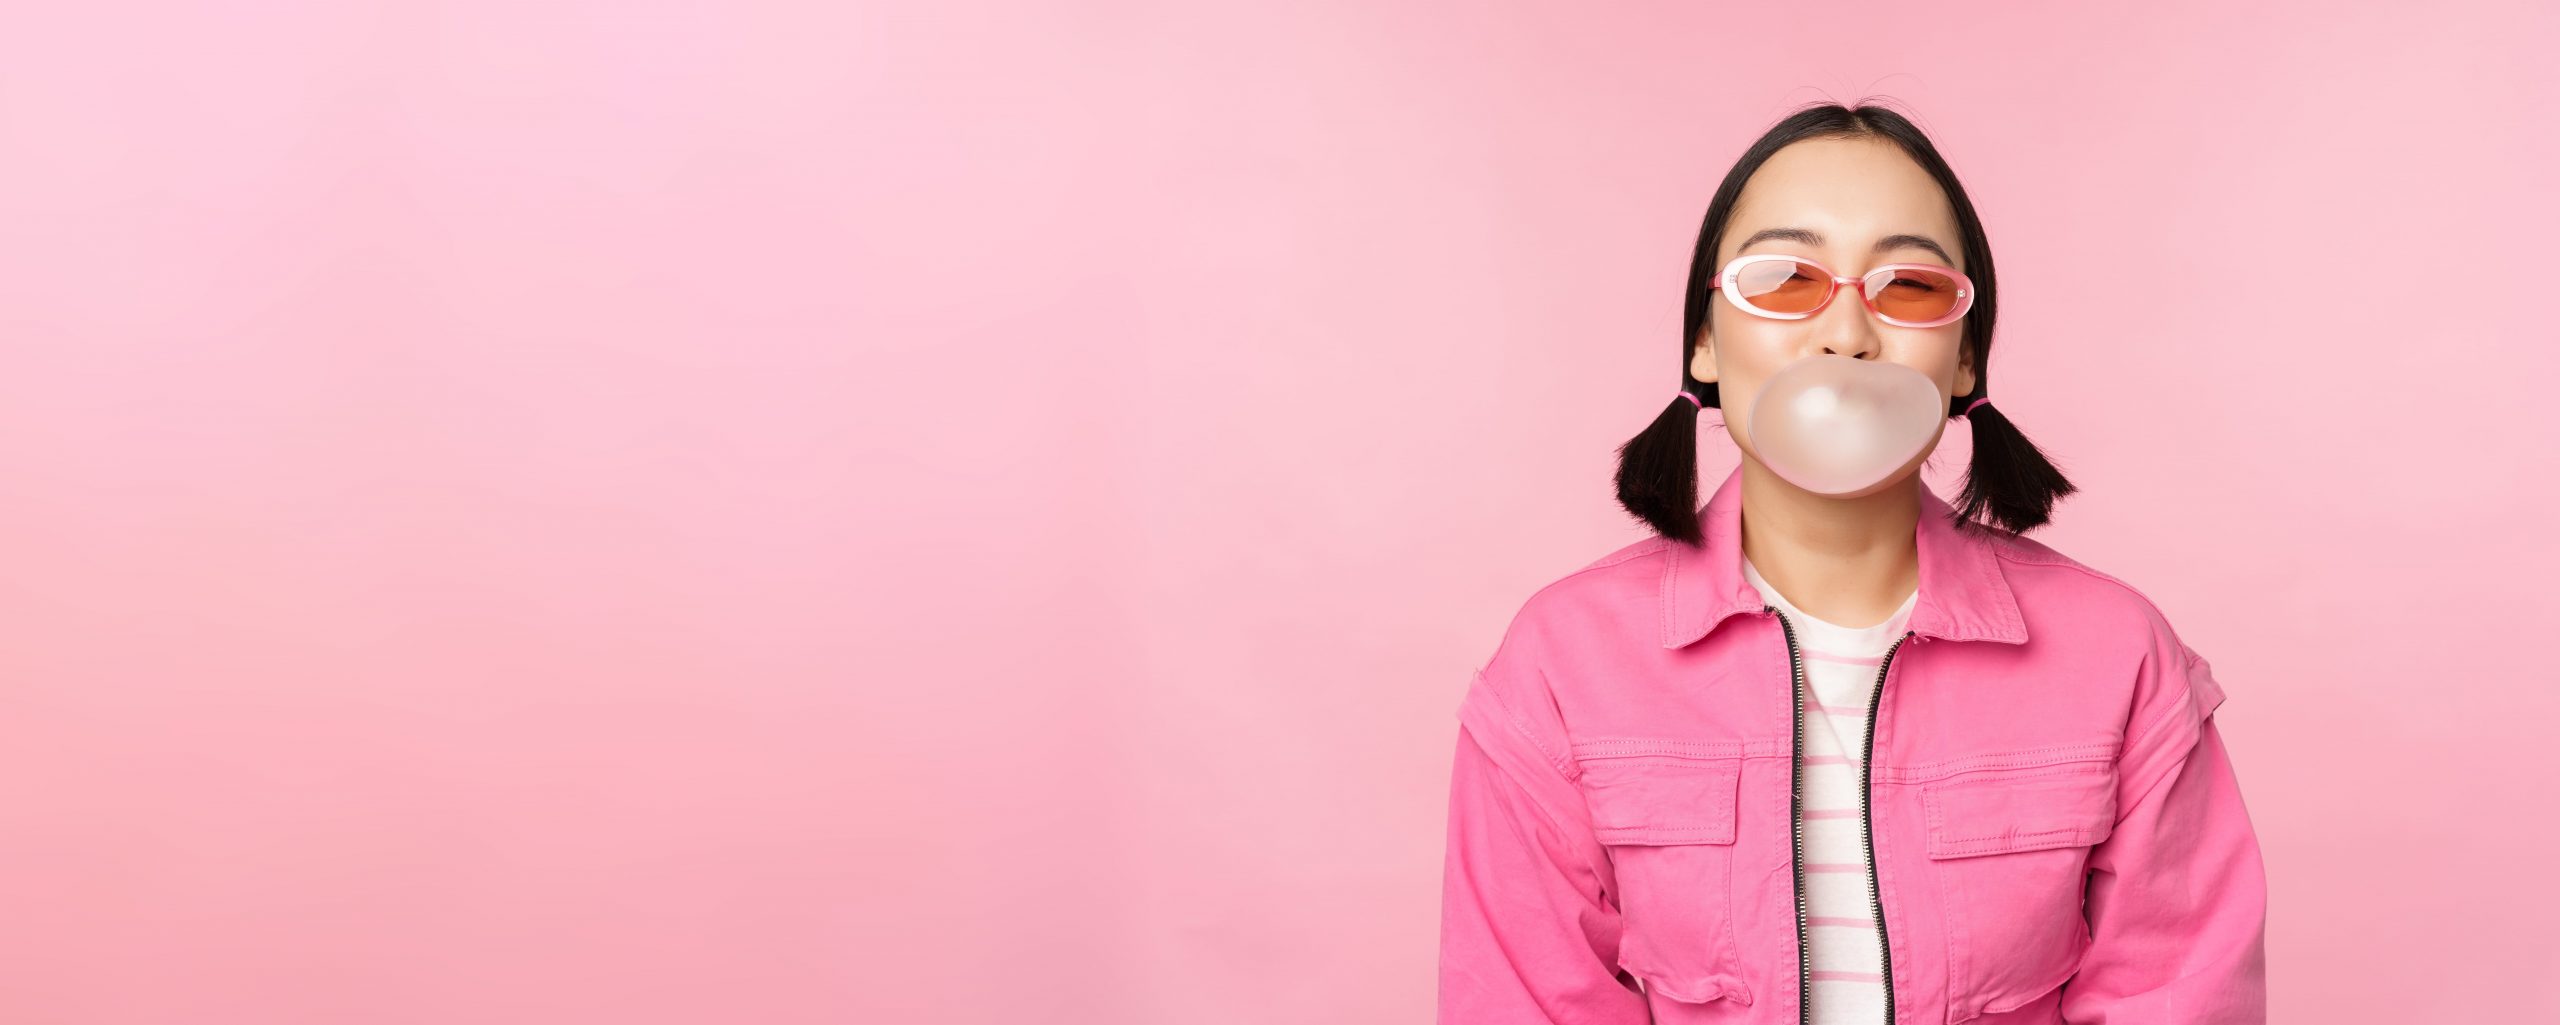 A girl blowing bubble gum against a pink background.